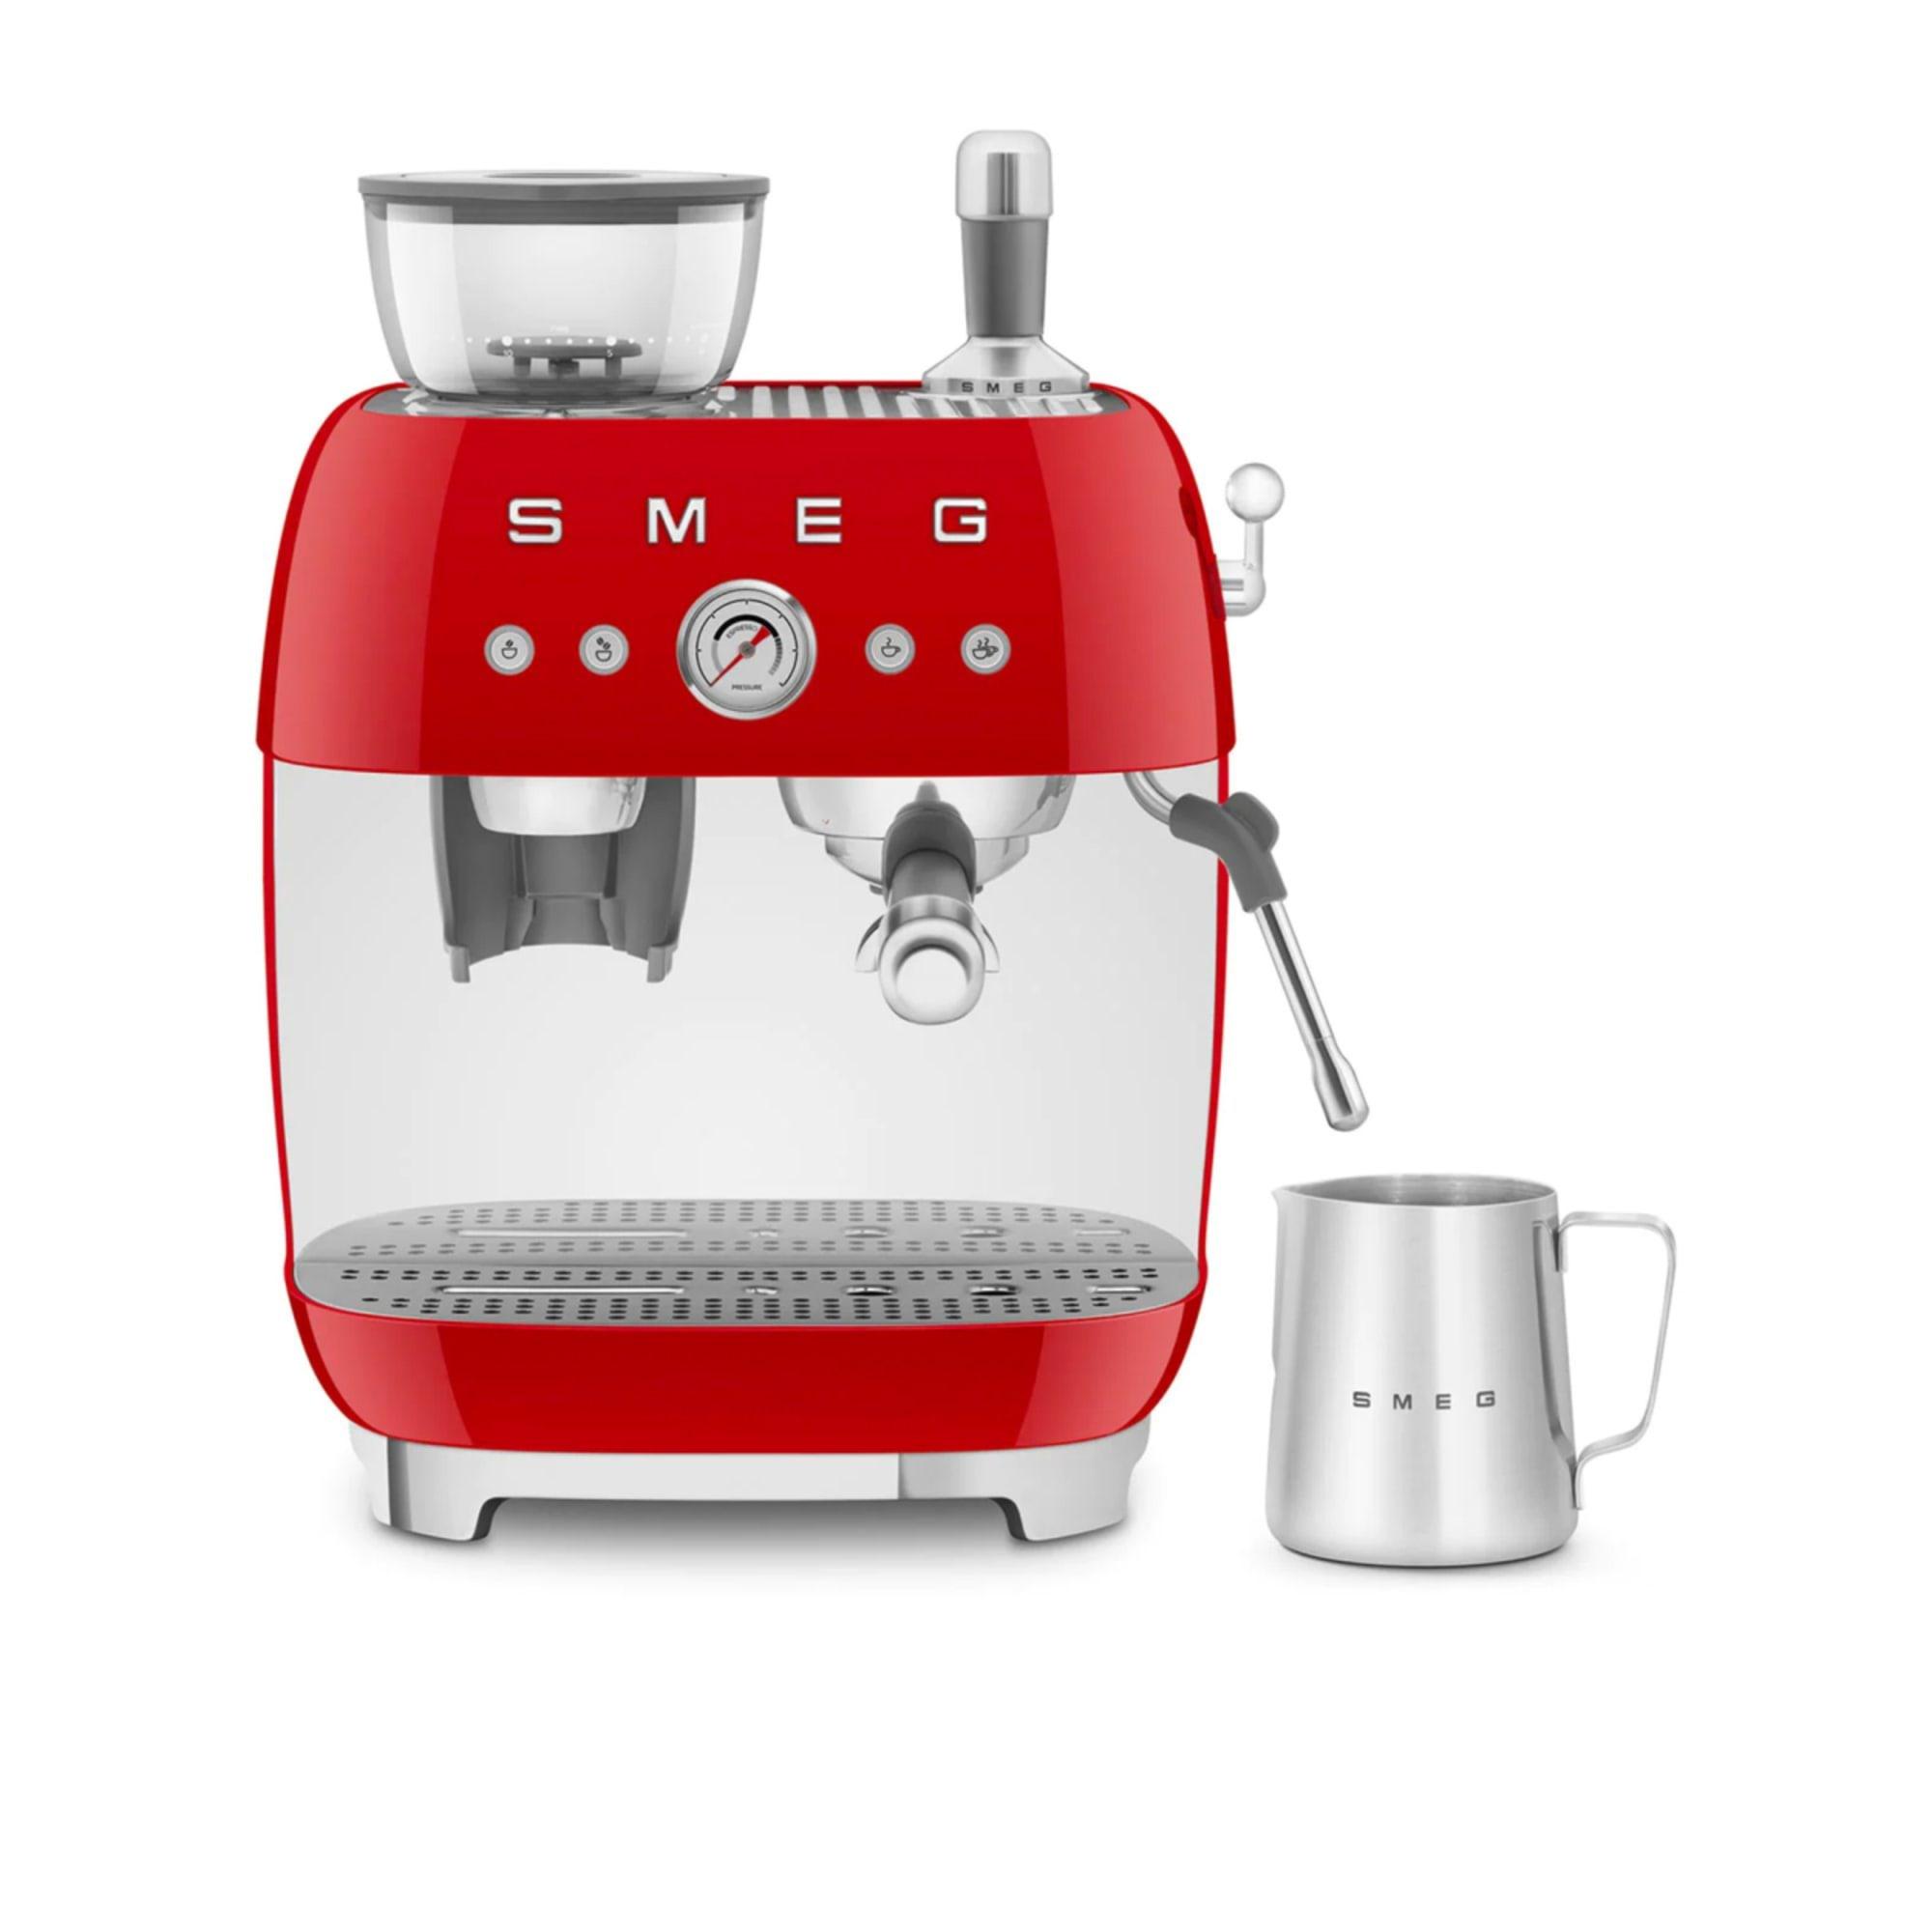 Smeg 50's Retro Style Espresso Machine with Built In Grinder Red Image 9